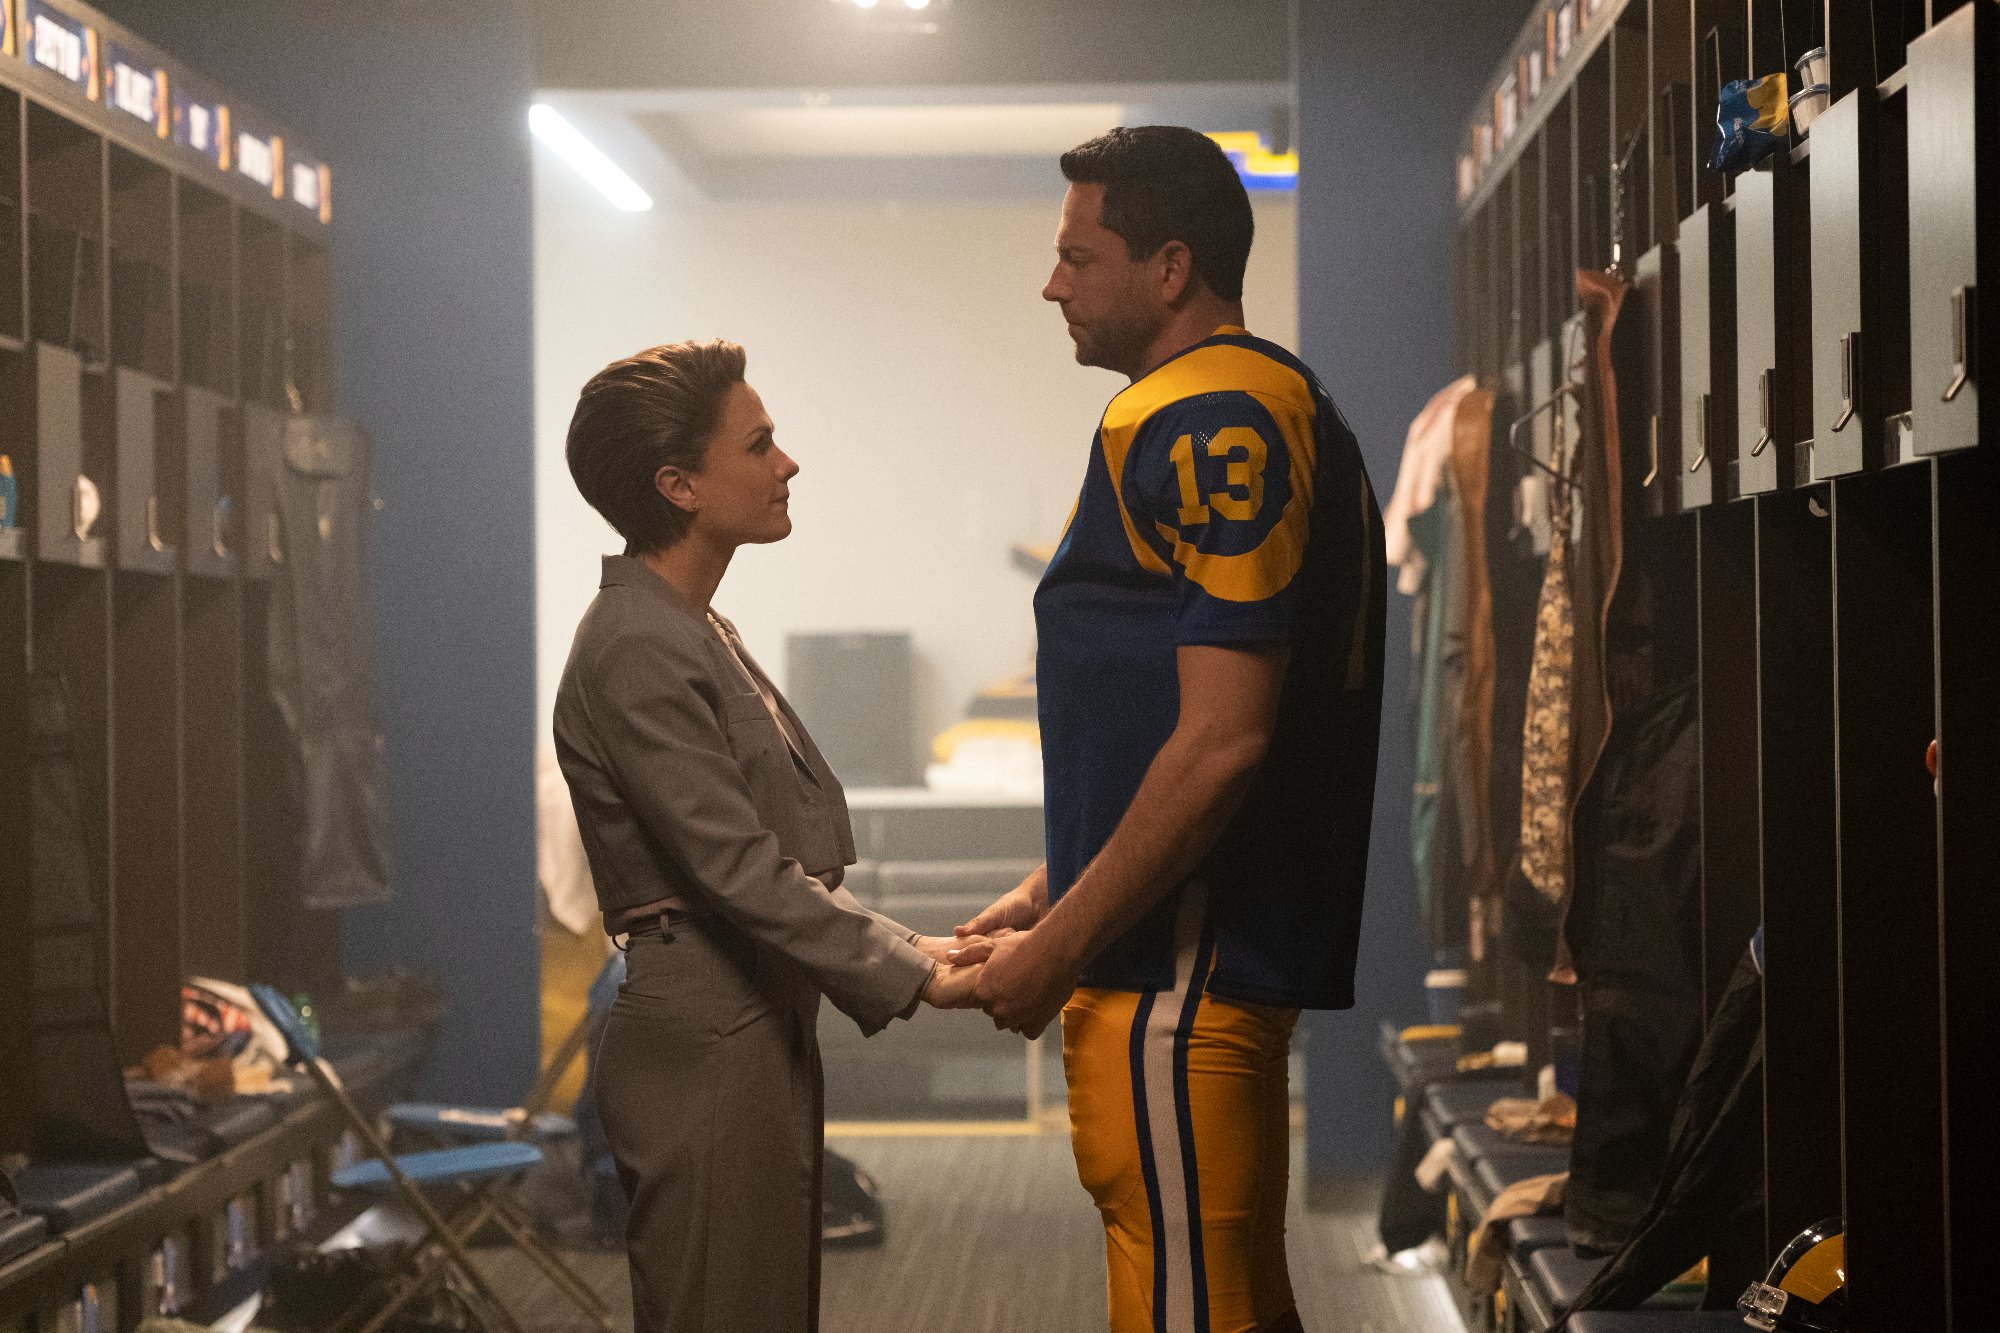 American Underdog: The Kurt Warner Story' movie trailer is out